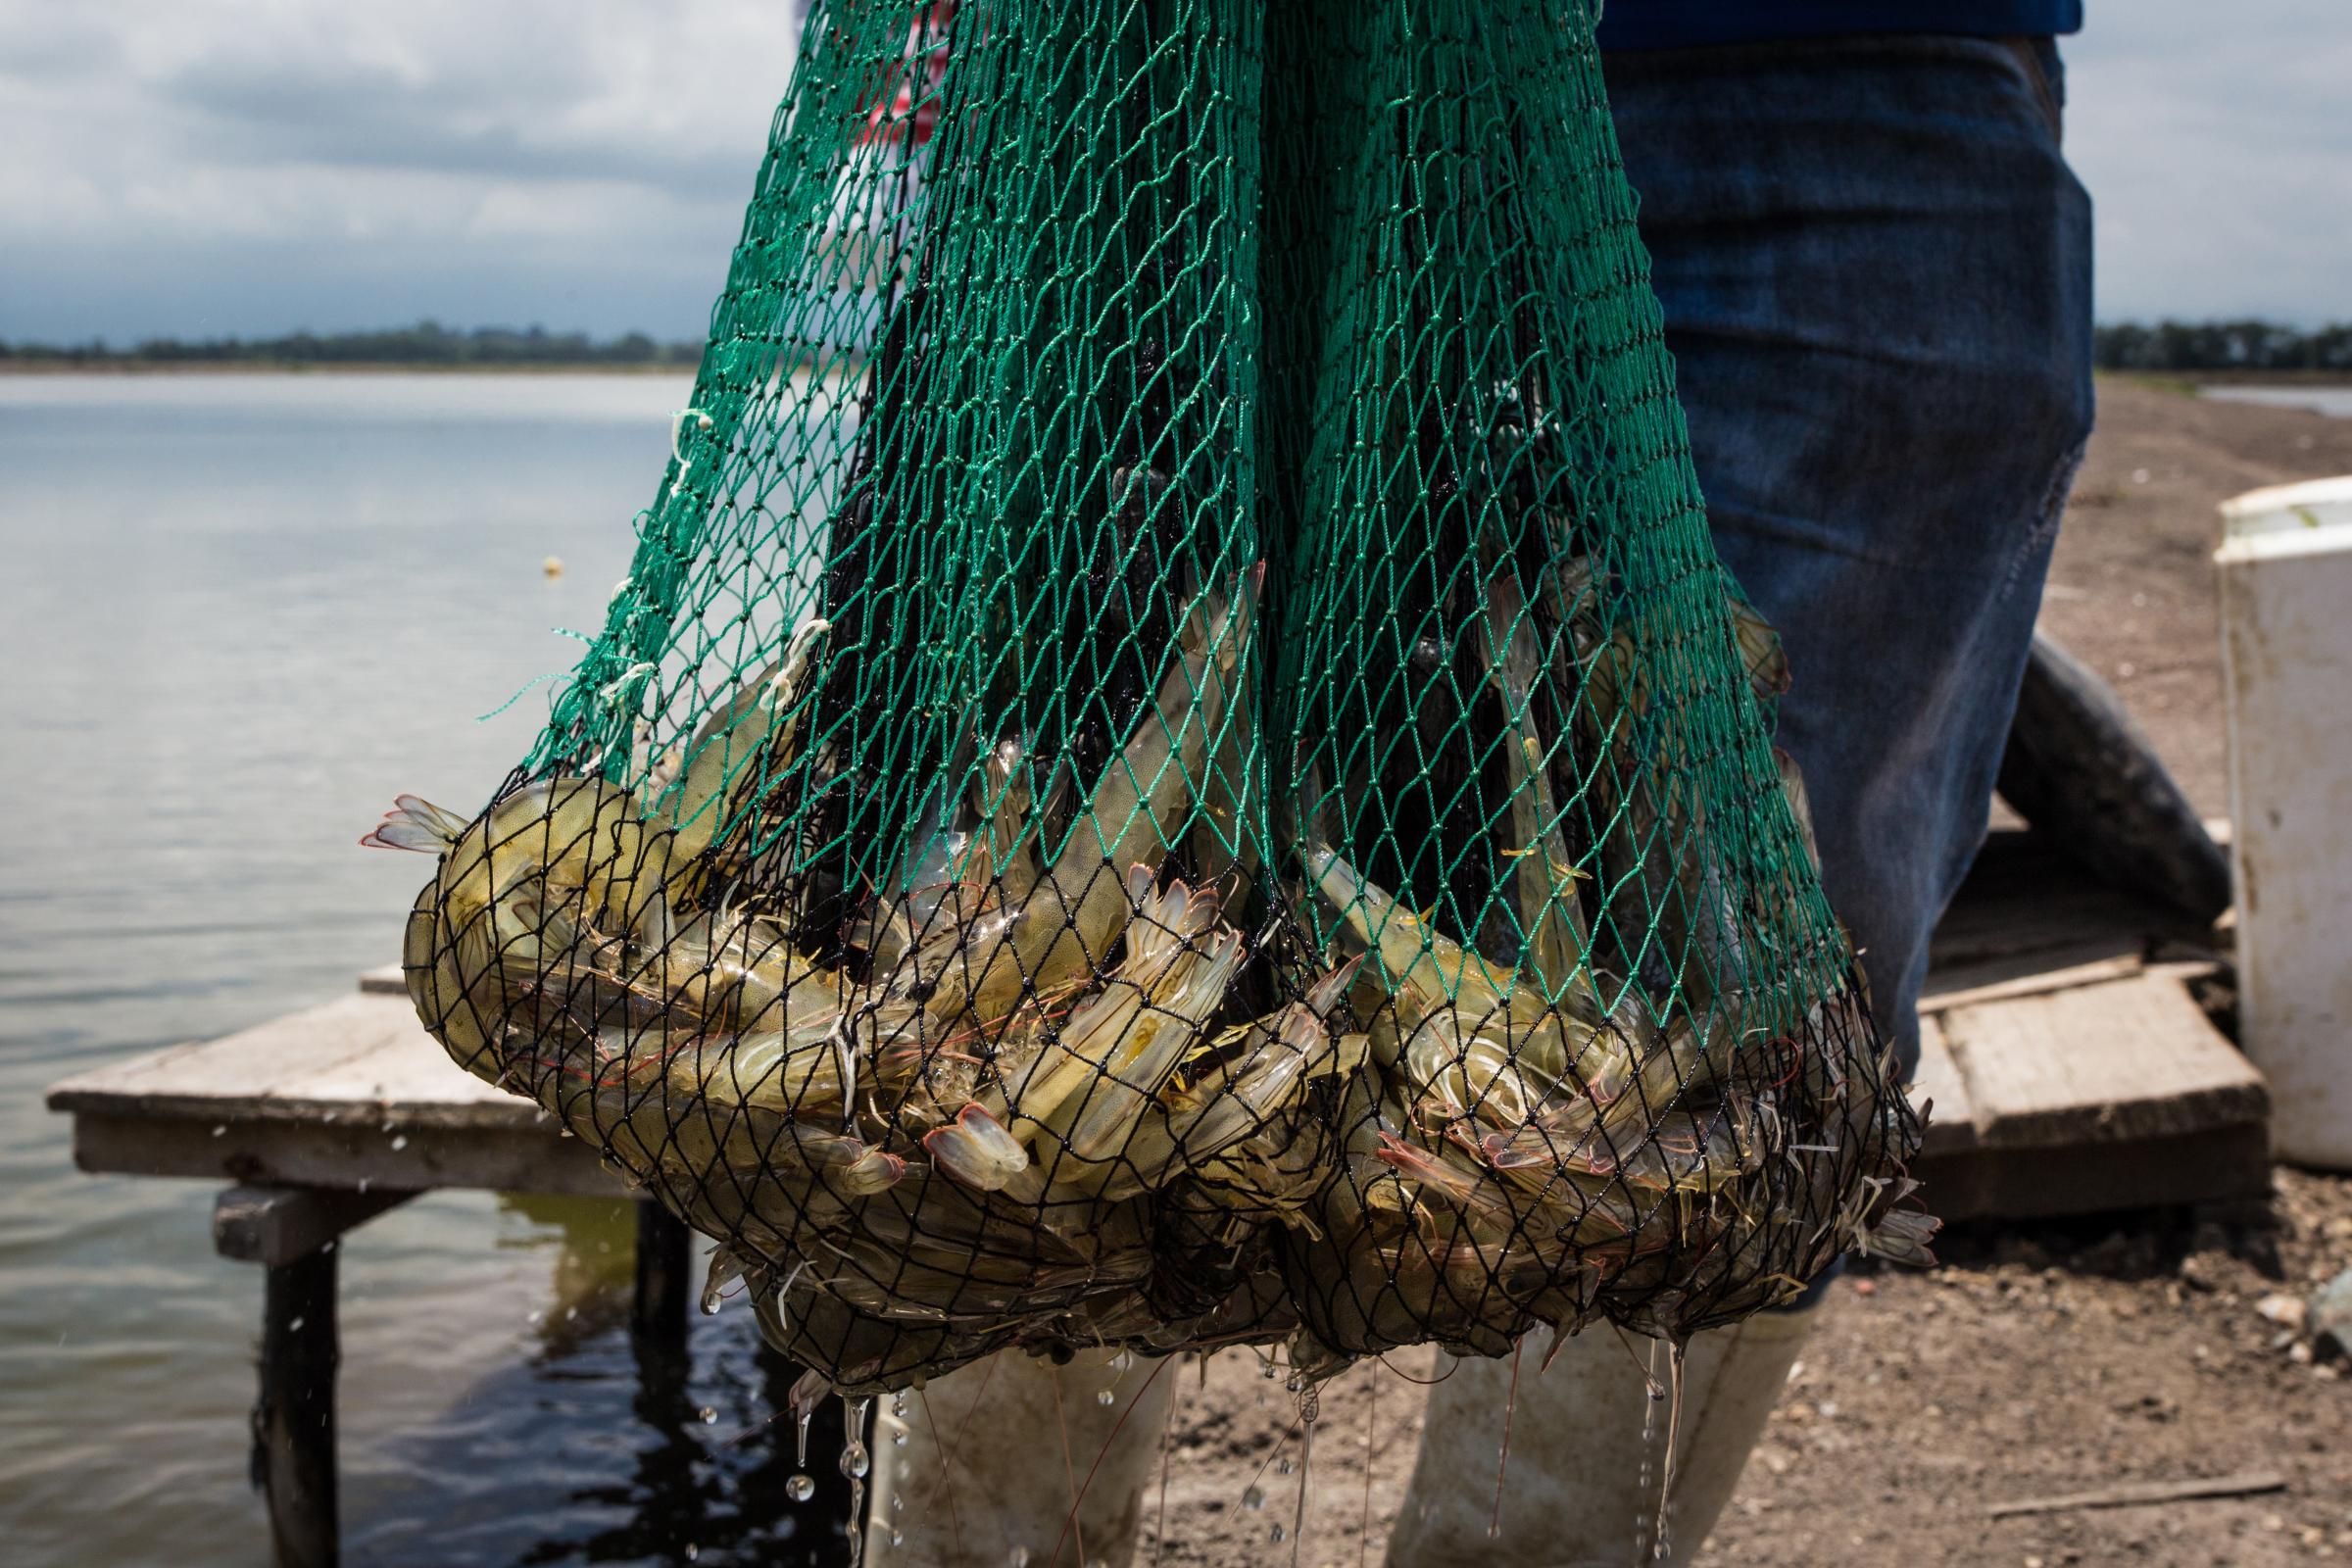 Each day the shrimp are captured in nets to examine the size and weight at a shrimp farm in...